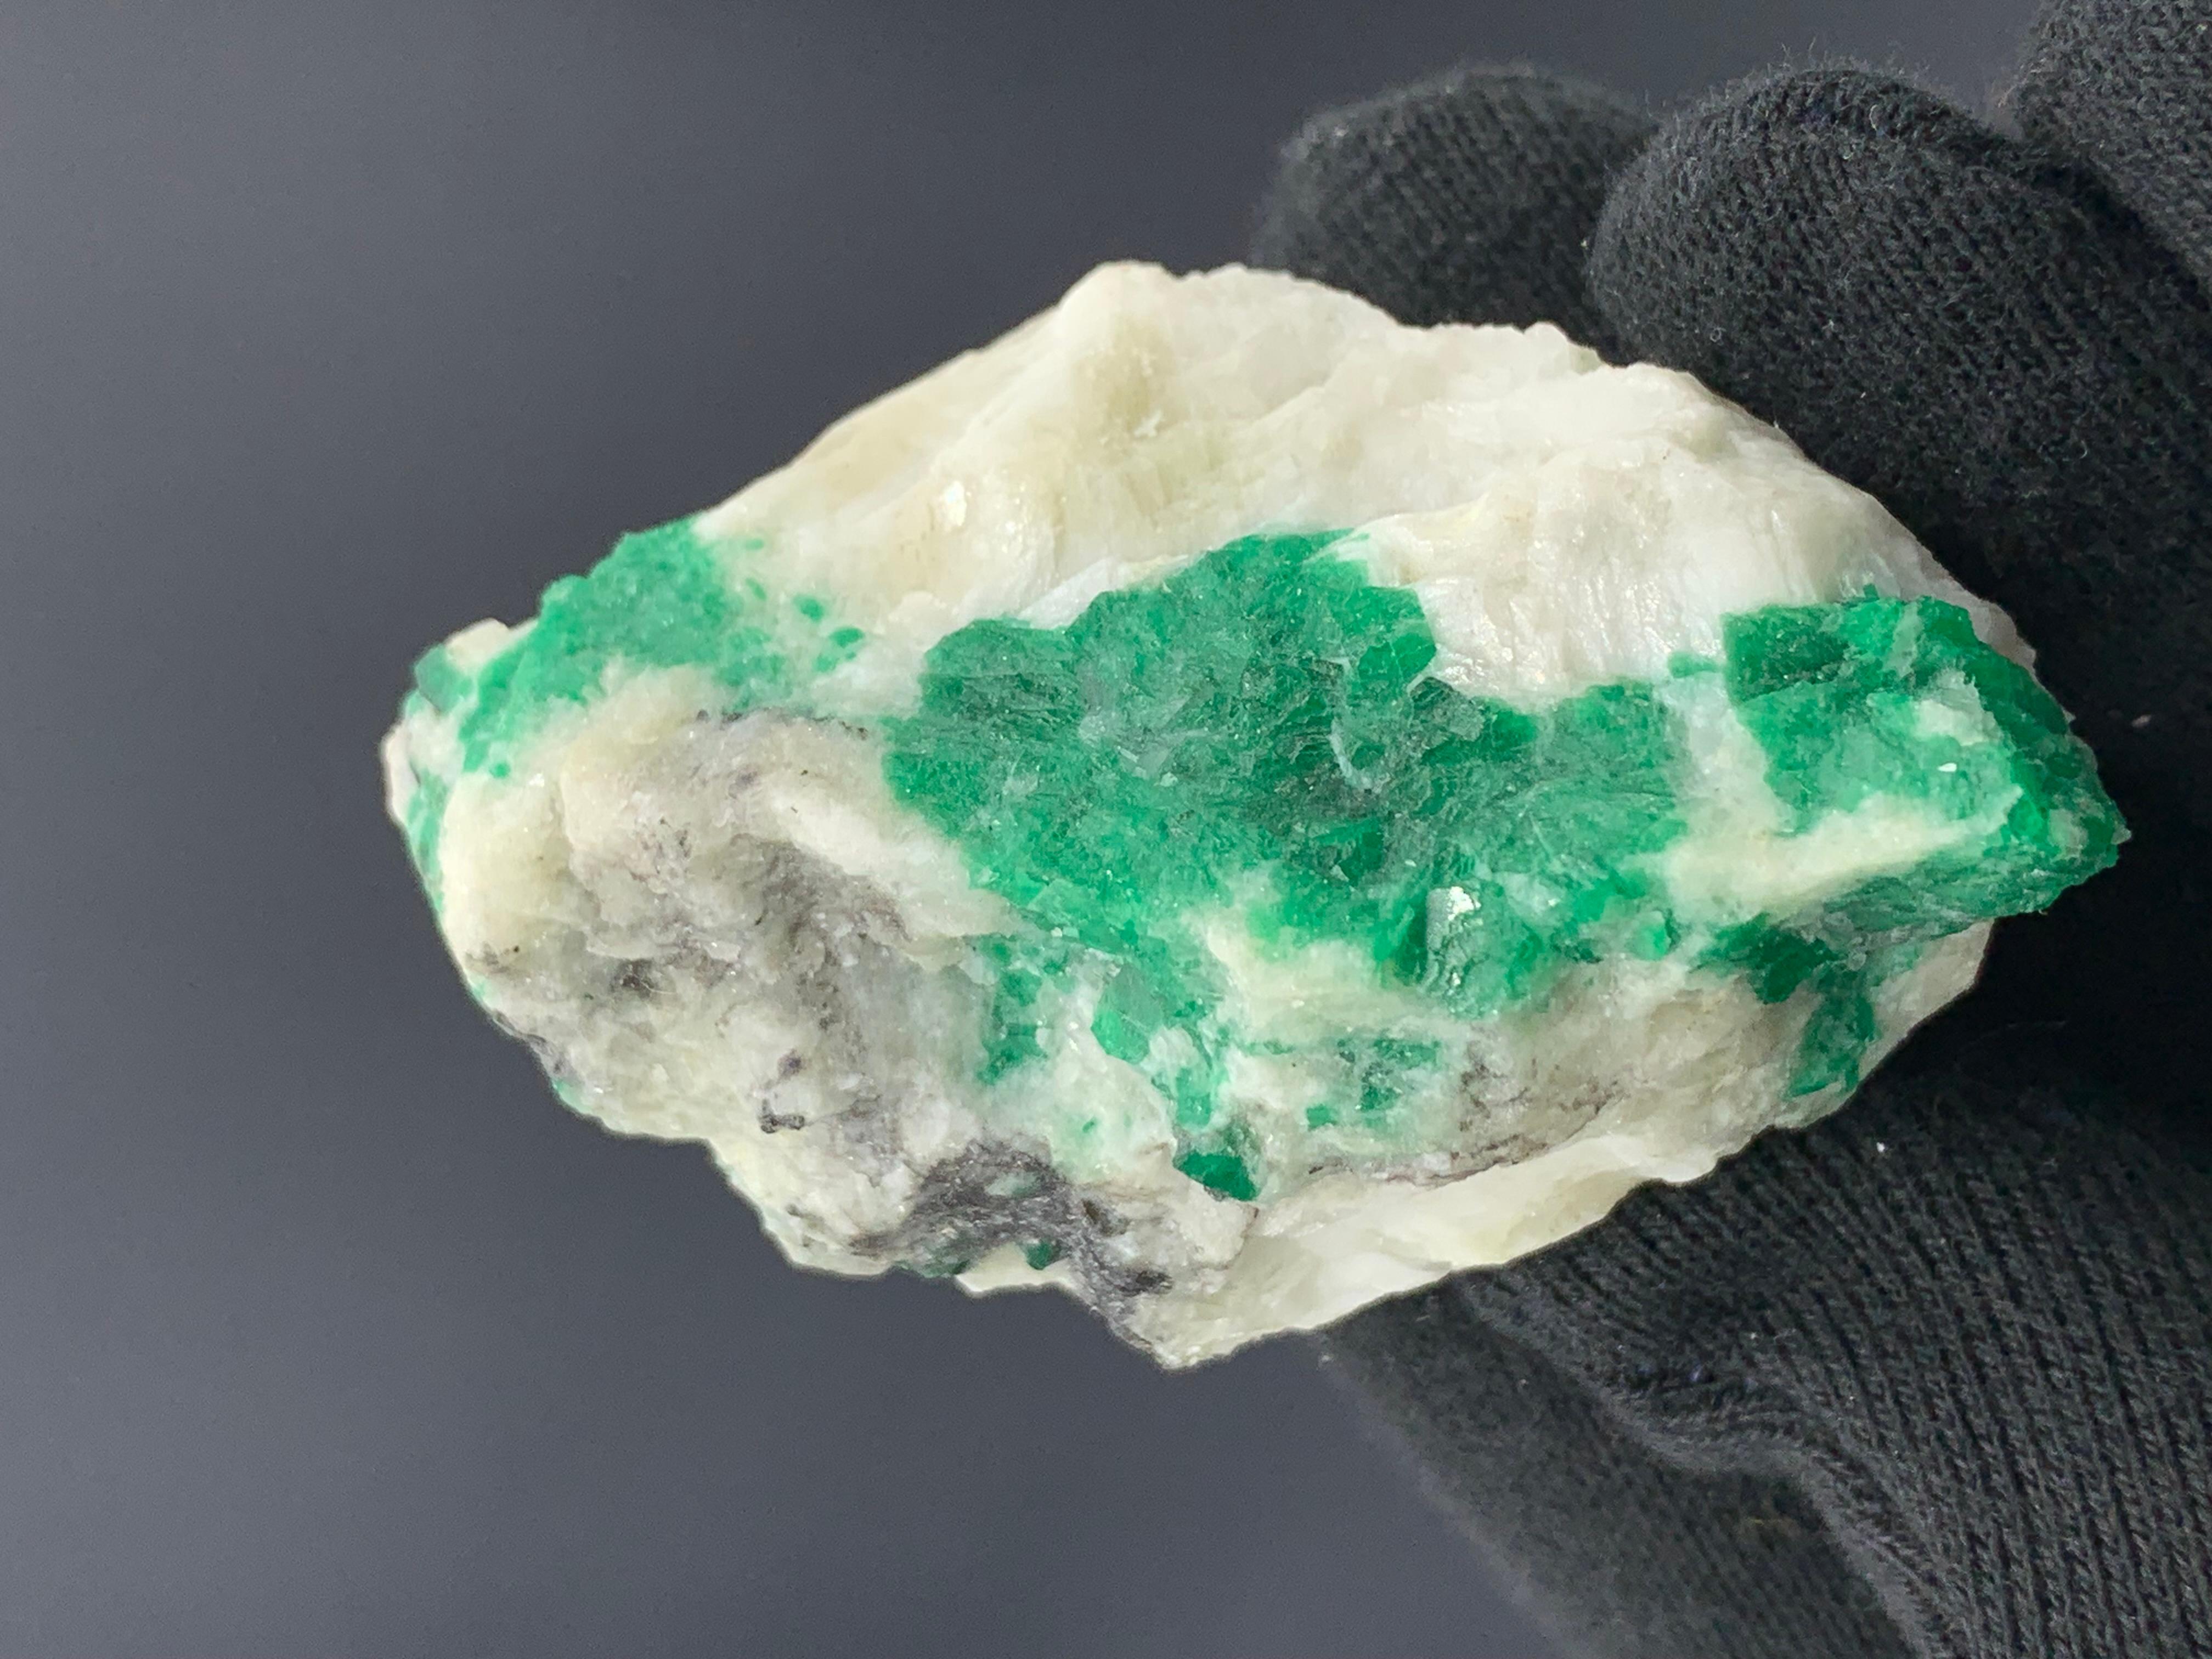 Rock Crystal 98.71 Gram Gorgeous Emerald Specimen From Swat Valley, Pakistan  For Sale